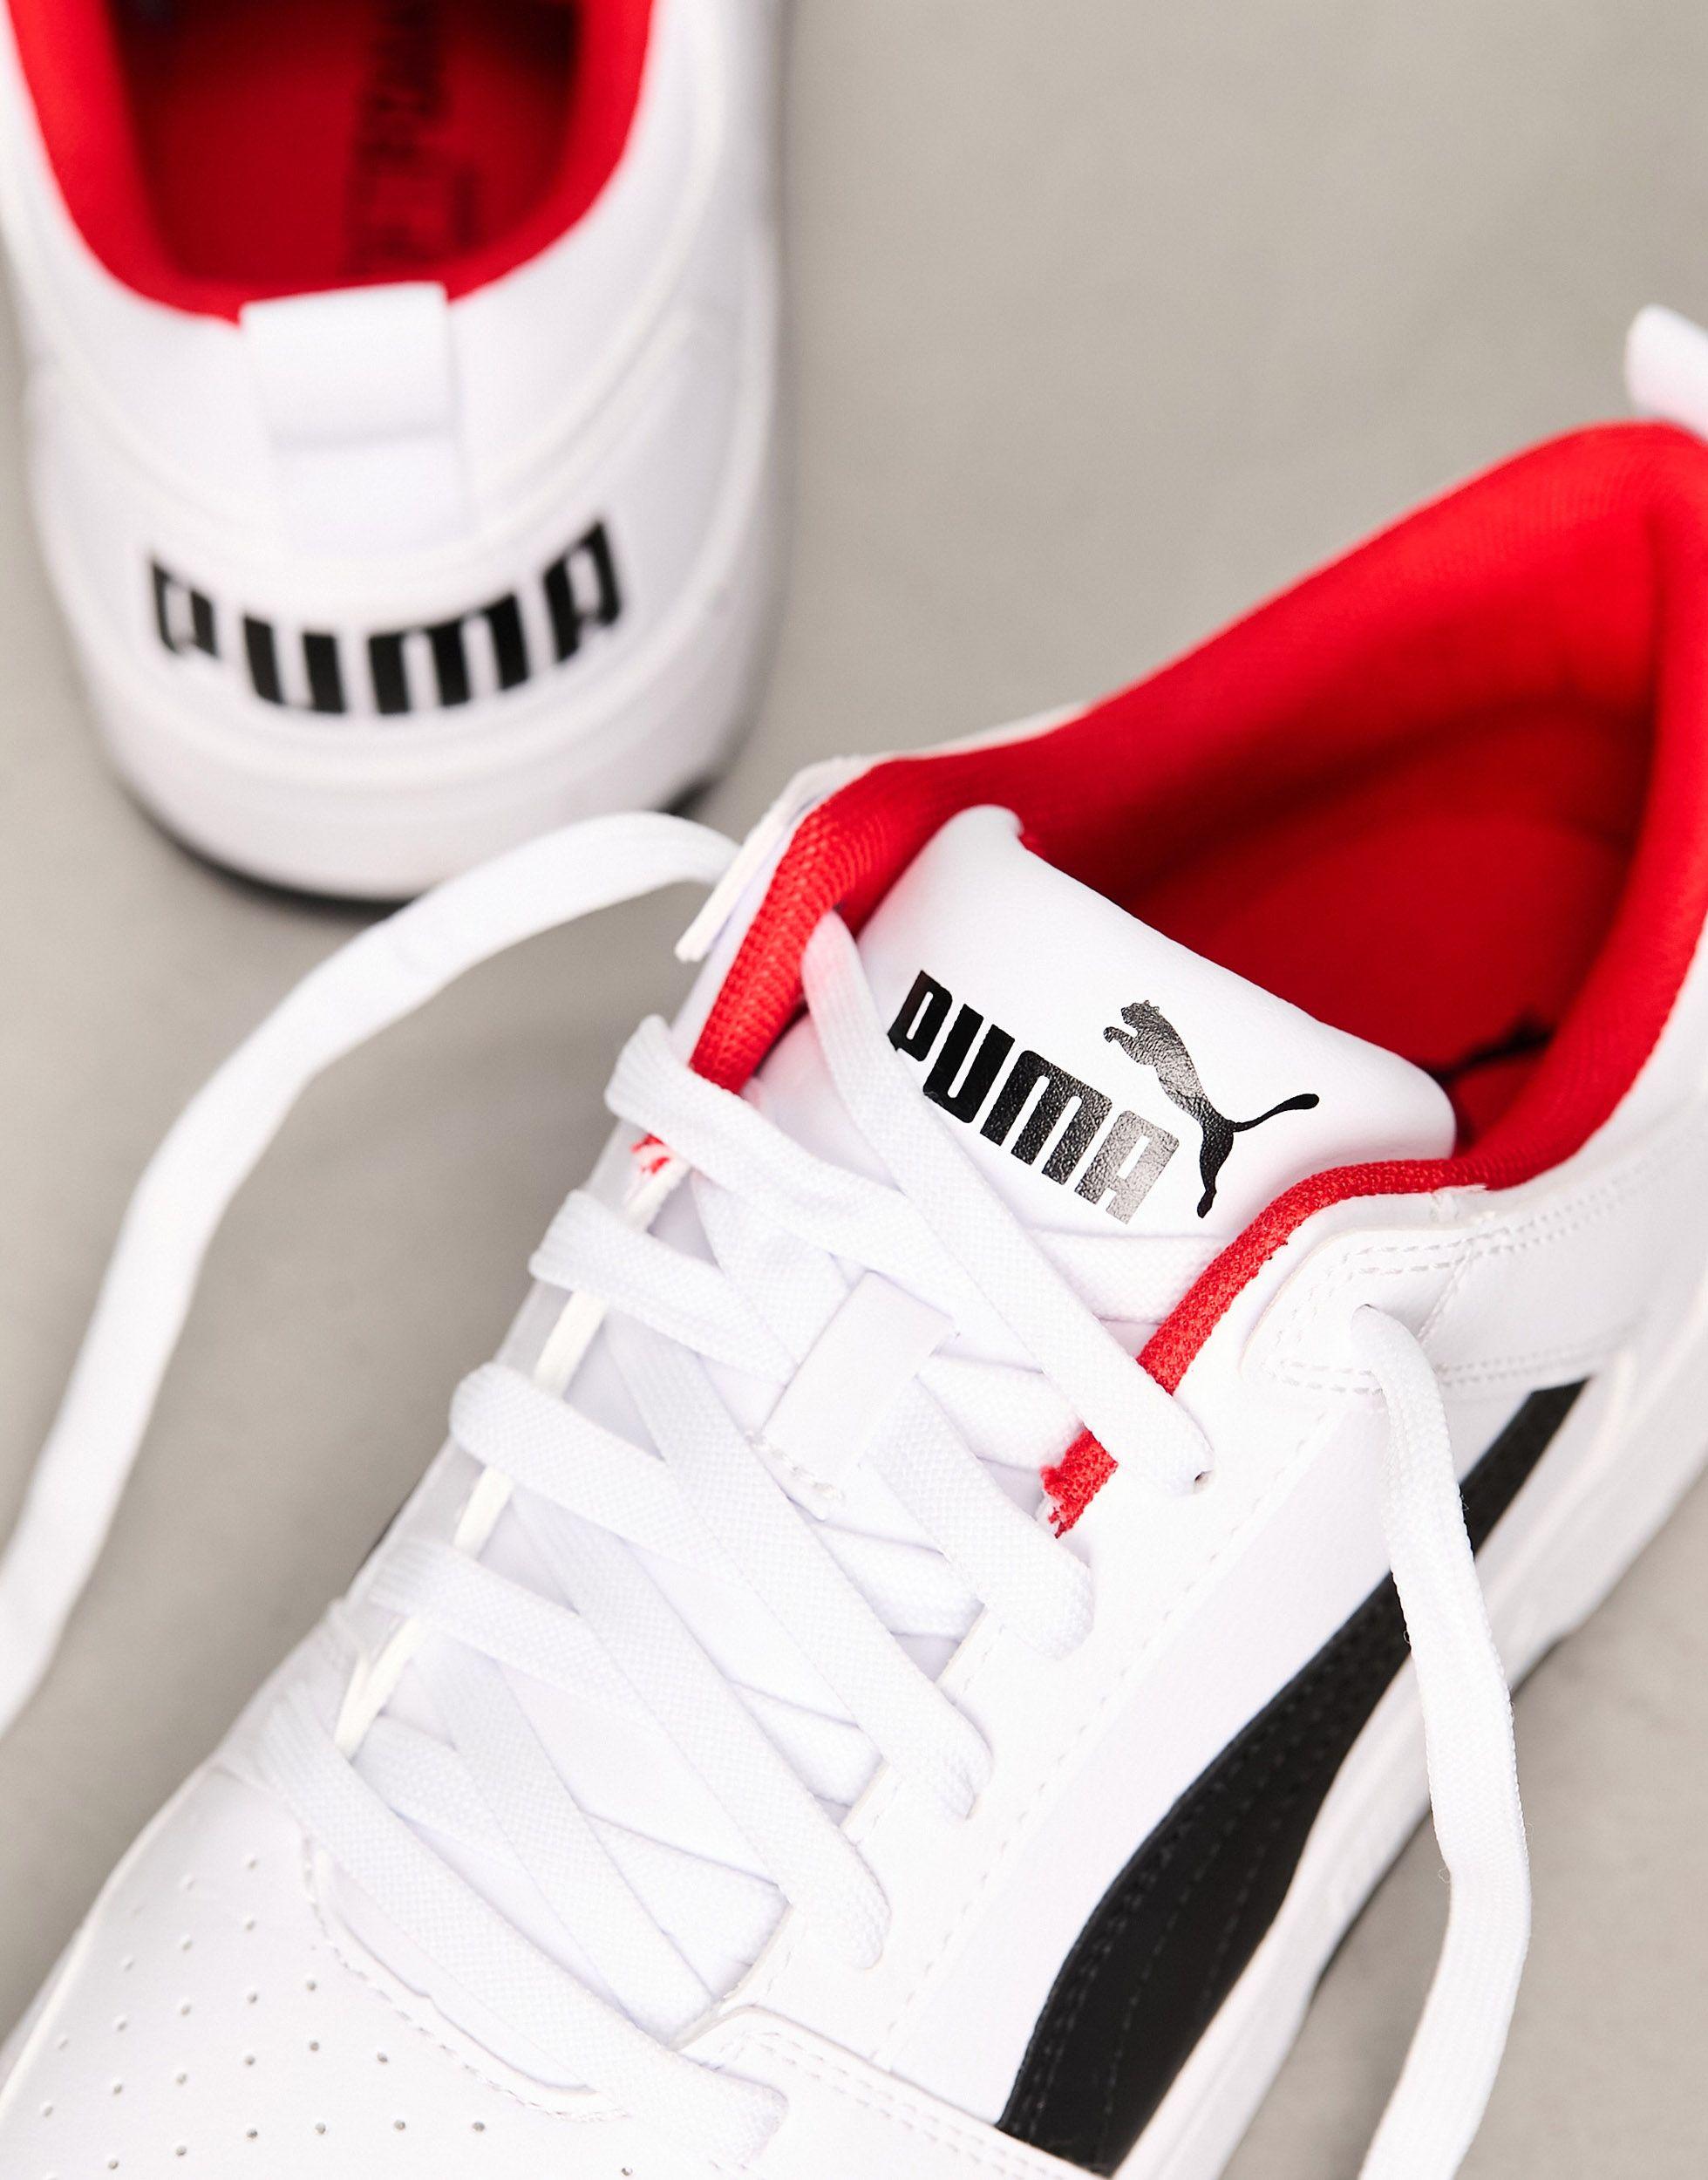 Puma Rebound Layup High Top Sneakers in Black and White